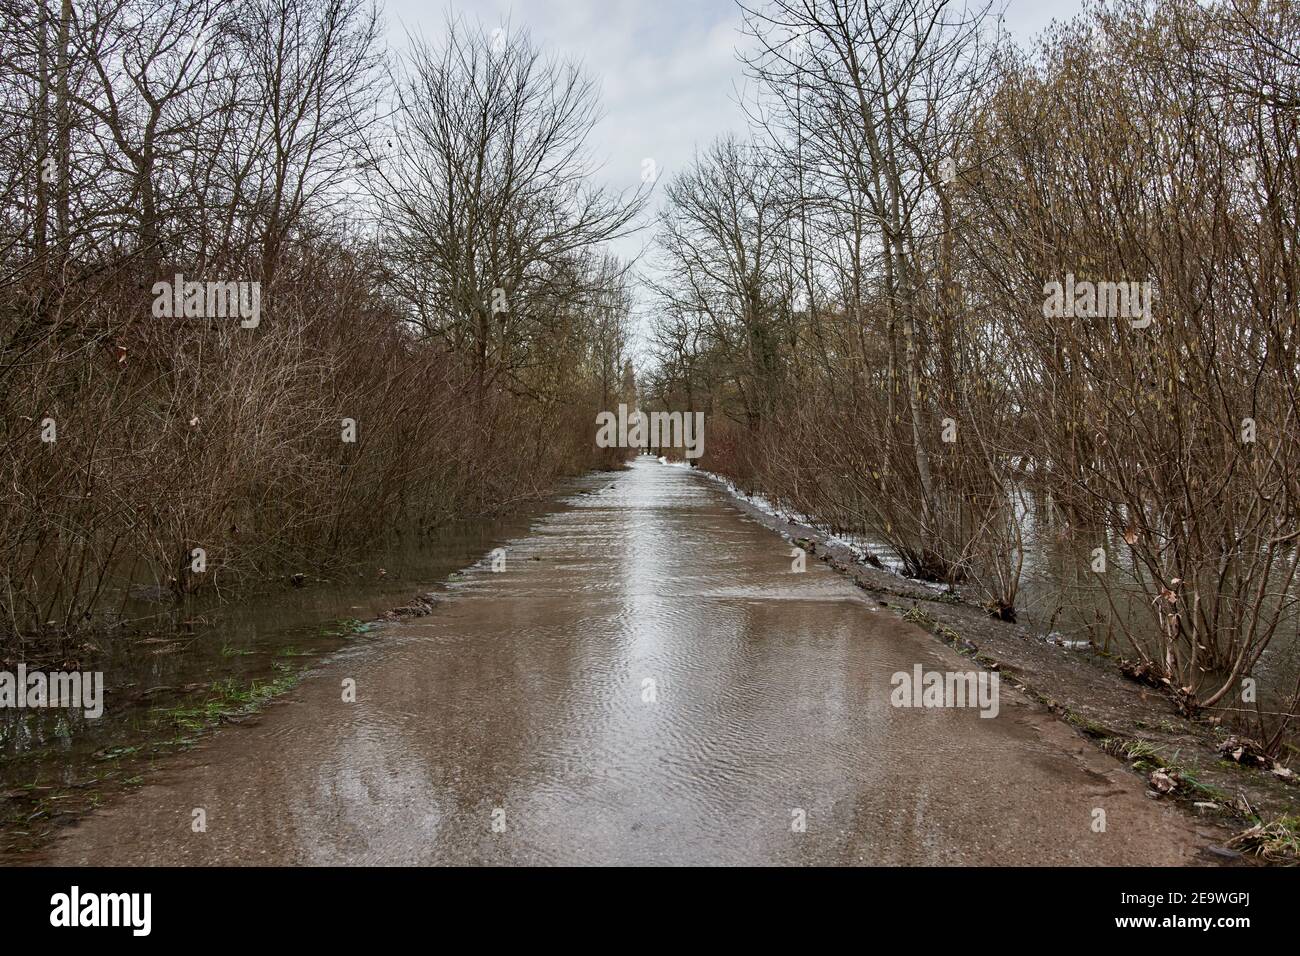 Flooded road after heavy rainfall through floodplain riparian forest at the Altrhein river in Plittersdorf, Germany. Stock Photo